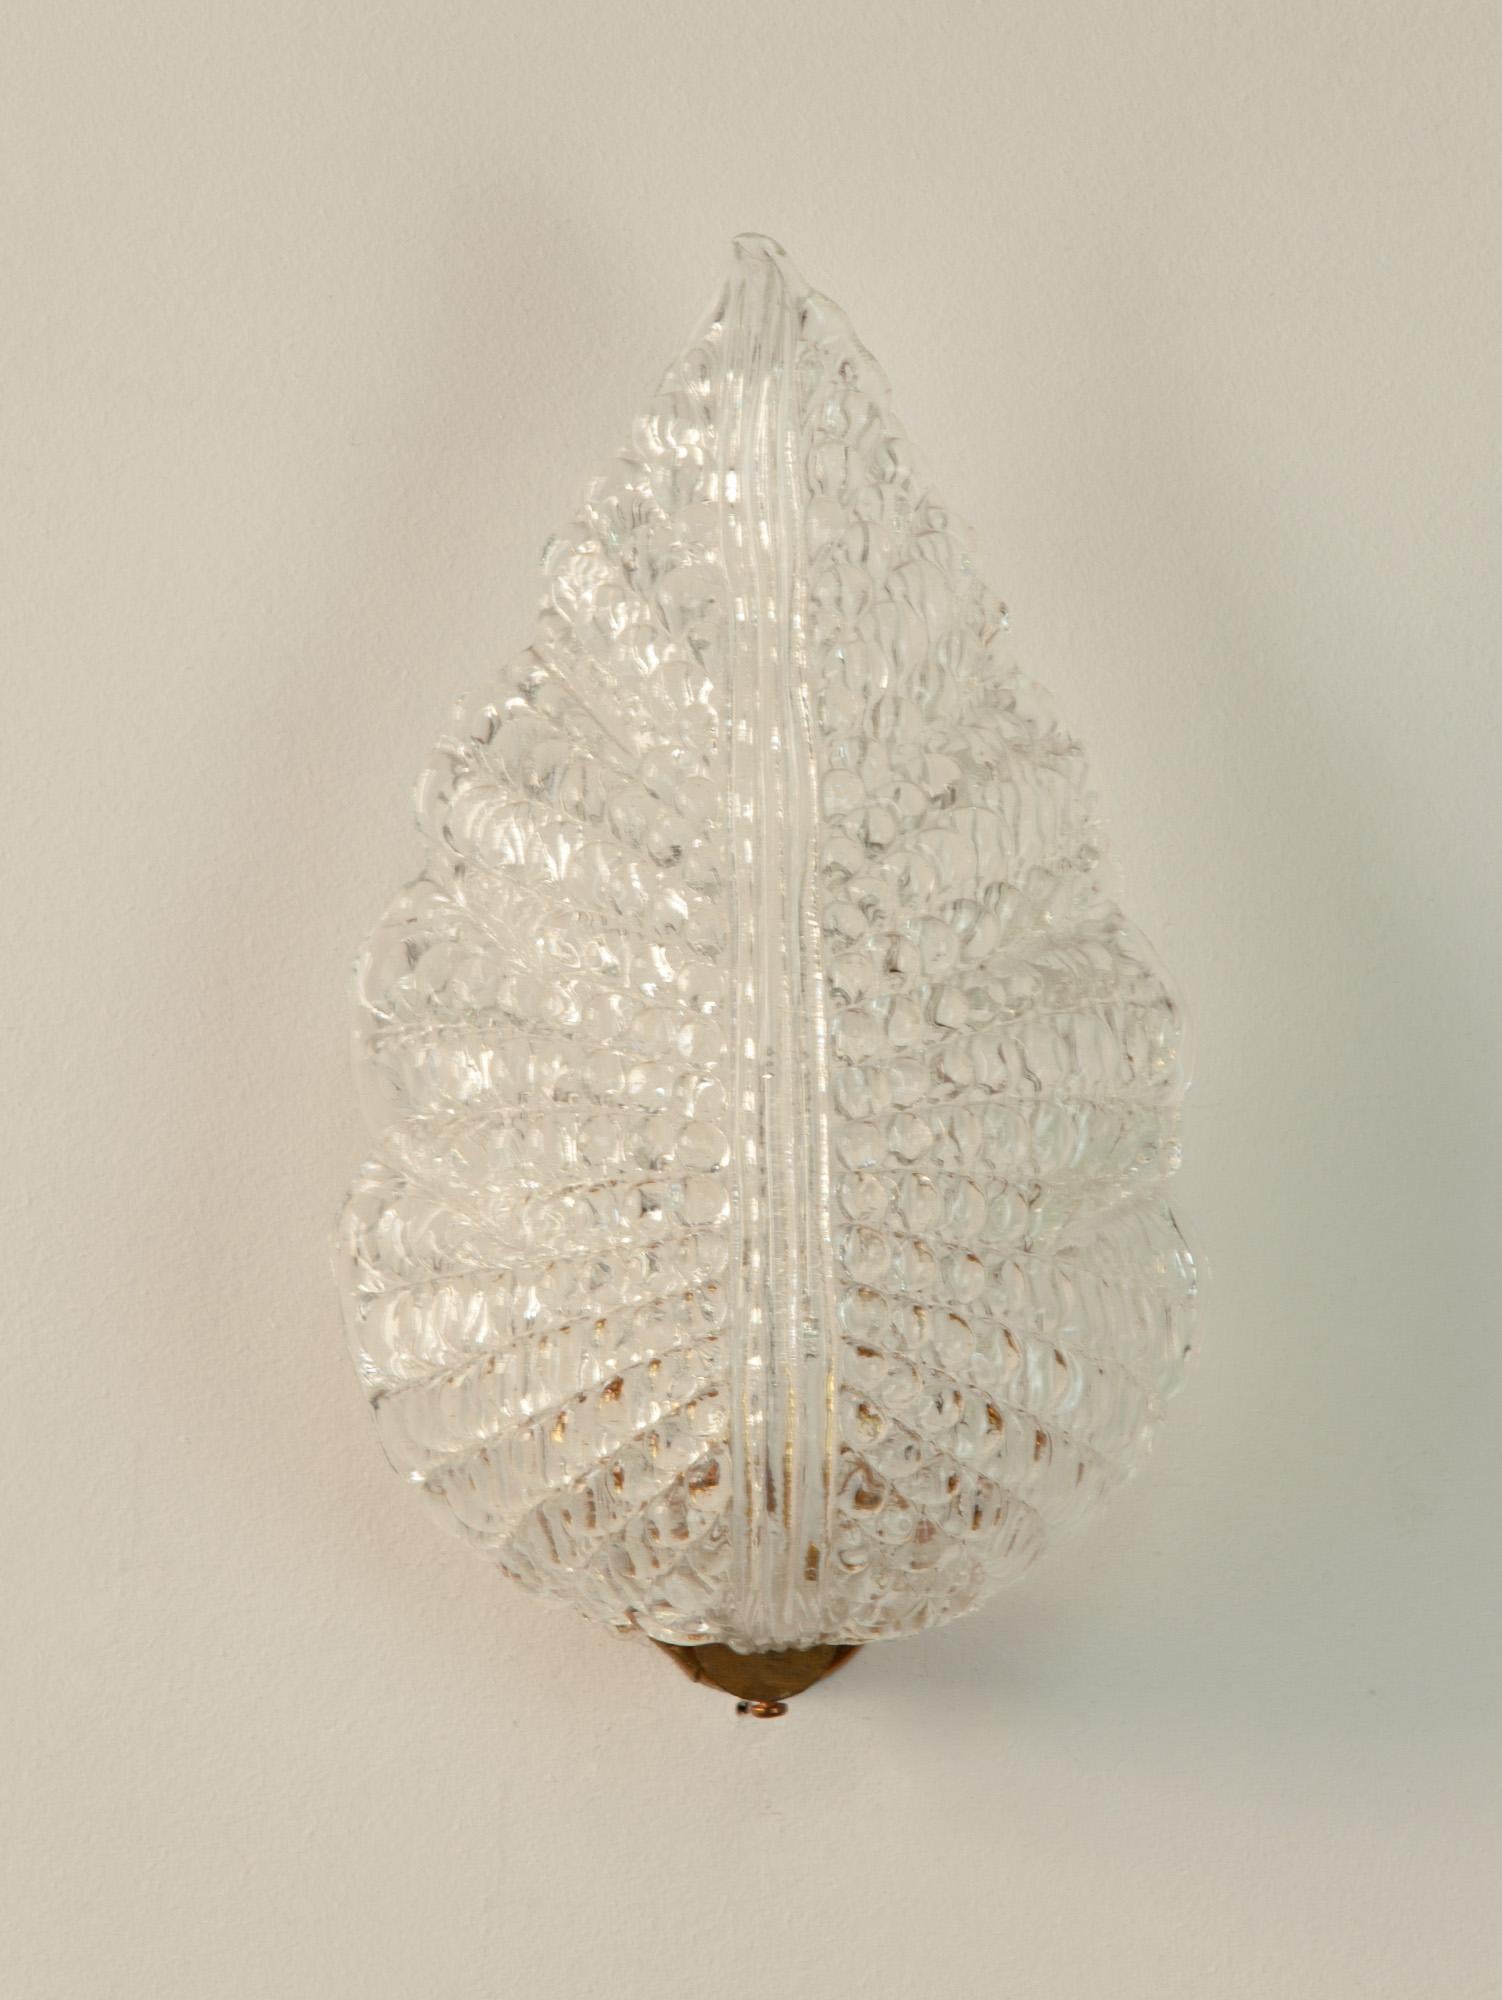 Italian Barovier & Toso wall light with a sculptural Murano glass shade and brass fixtures. The delicate pattern on the thick molded glass emits a soft ambient light. Made in Italy in the 1940s.

Great vintage condition. Glass is in perfect